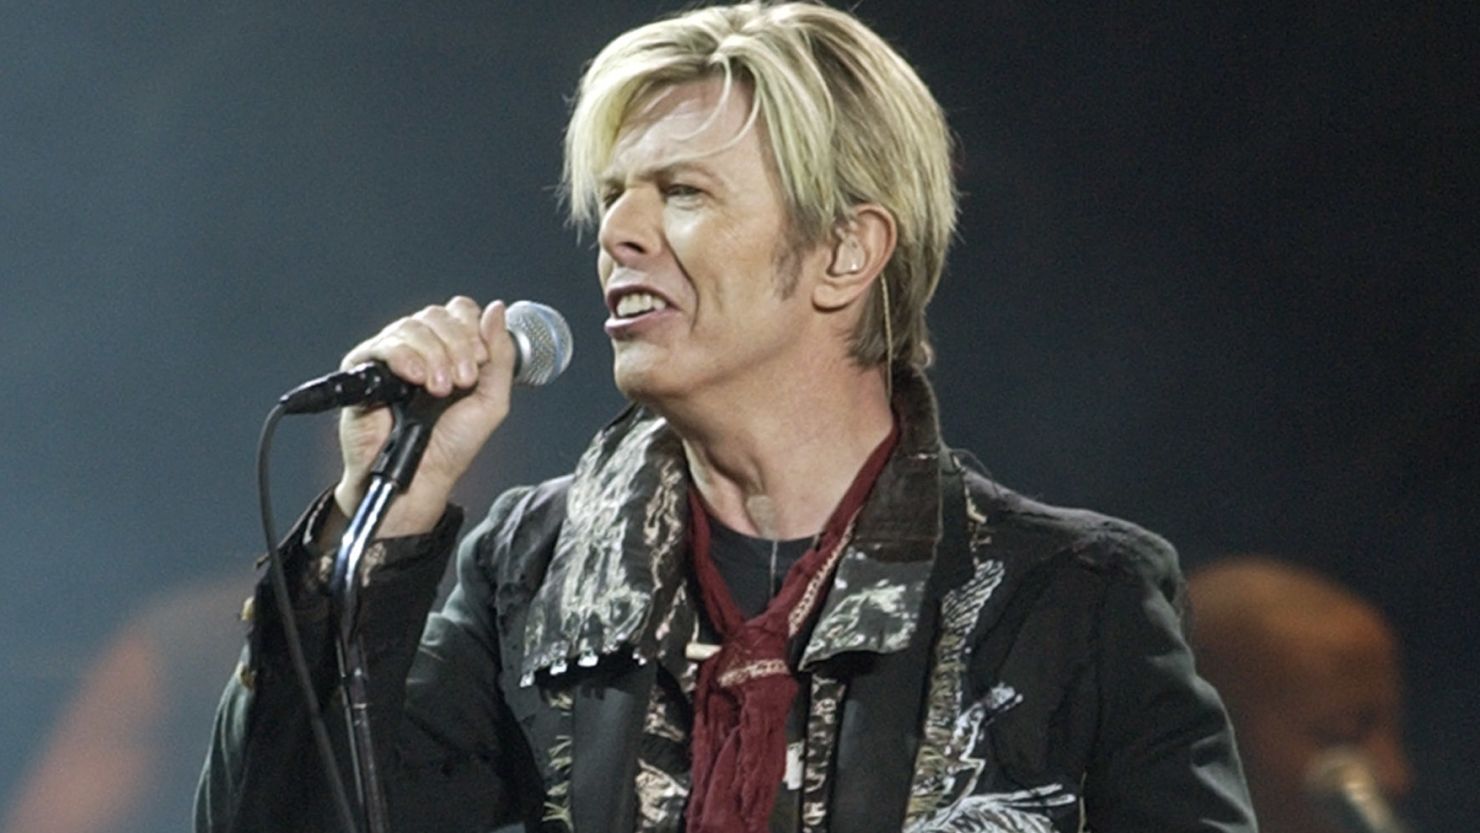 David Bowie performs at Madison Square Garden in New York on the "Reality" tour in 2003.